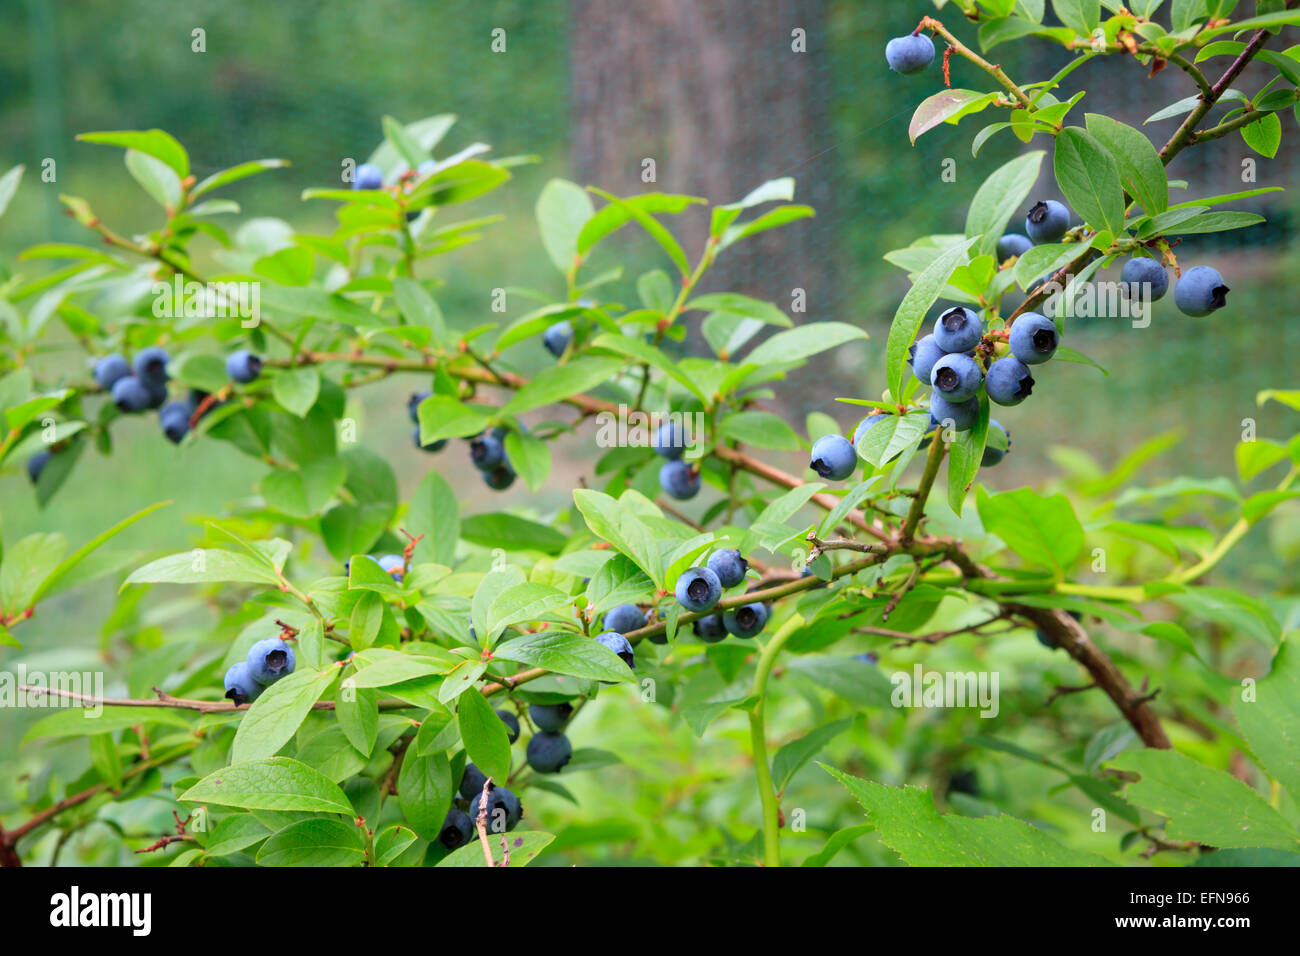 Blueberries at home garden Stock Photo